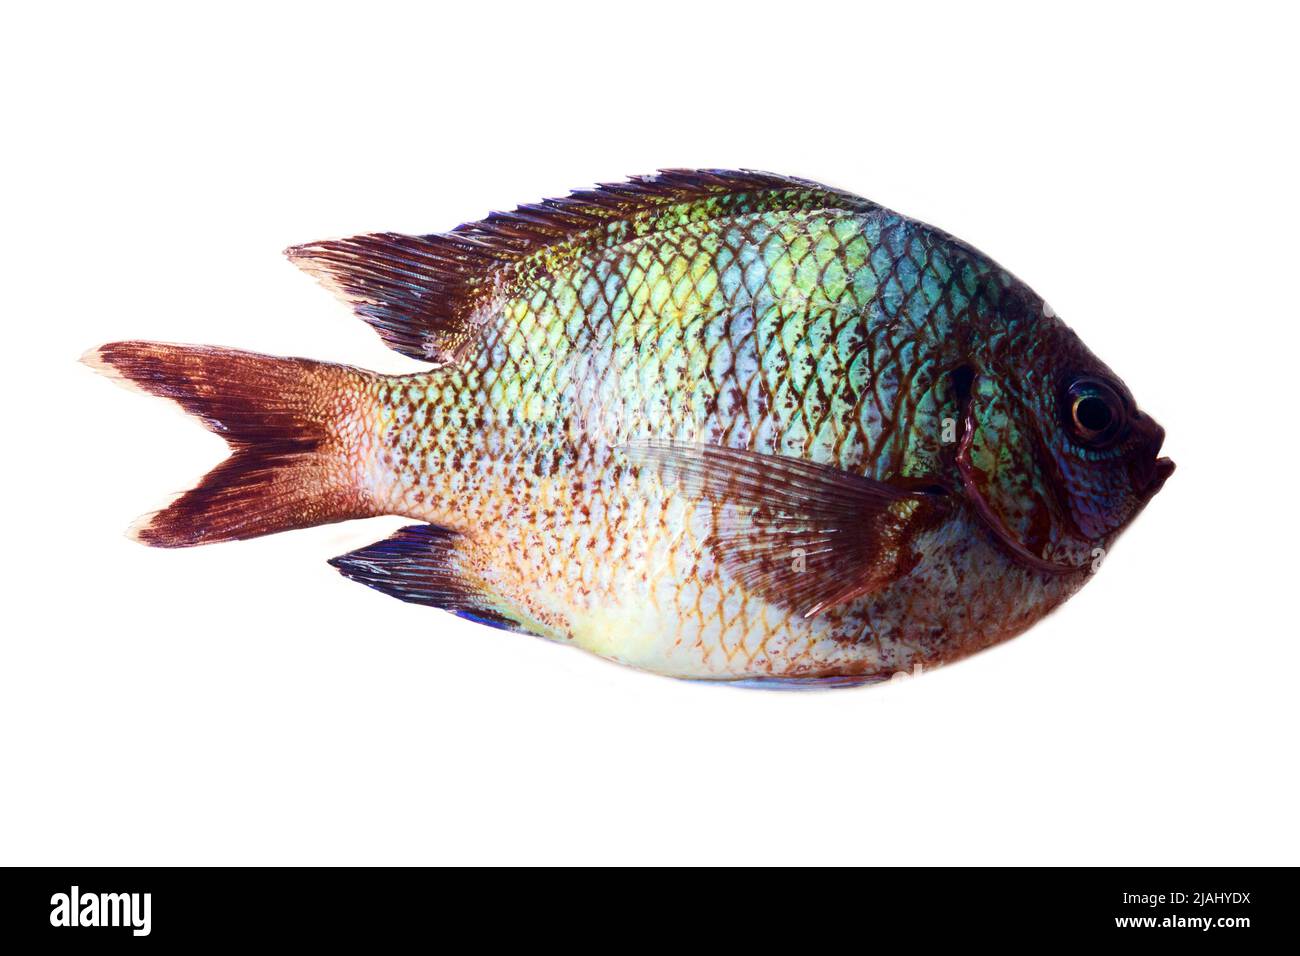 Cichlid (Cichlidae), Probably tilapia. Sri Lanka. The fish is isolated on a white background Stock Photo